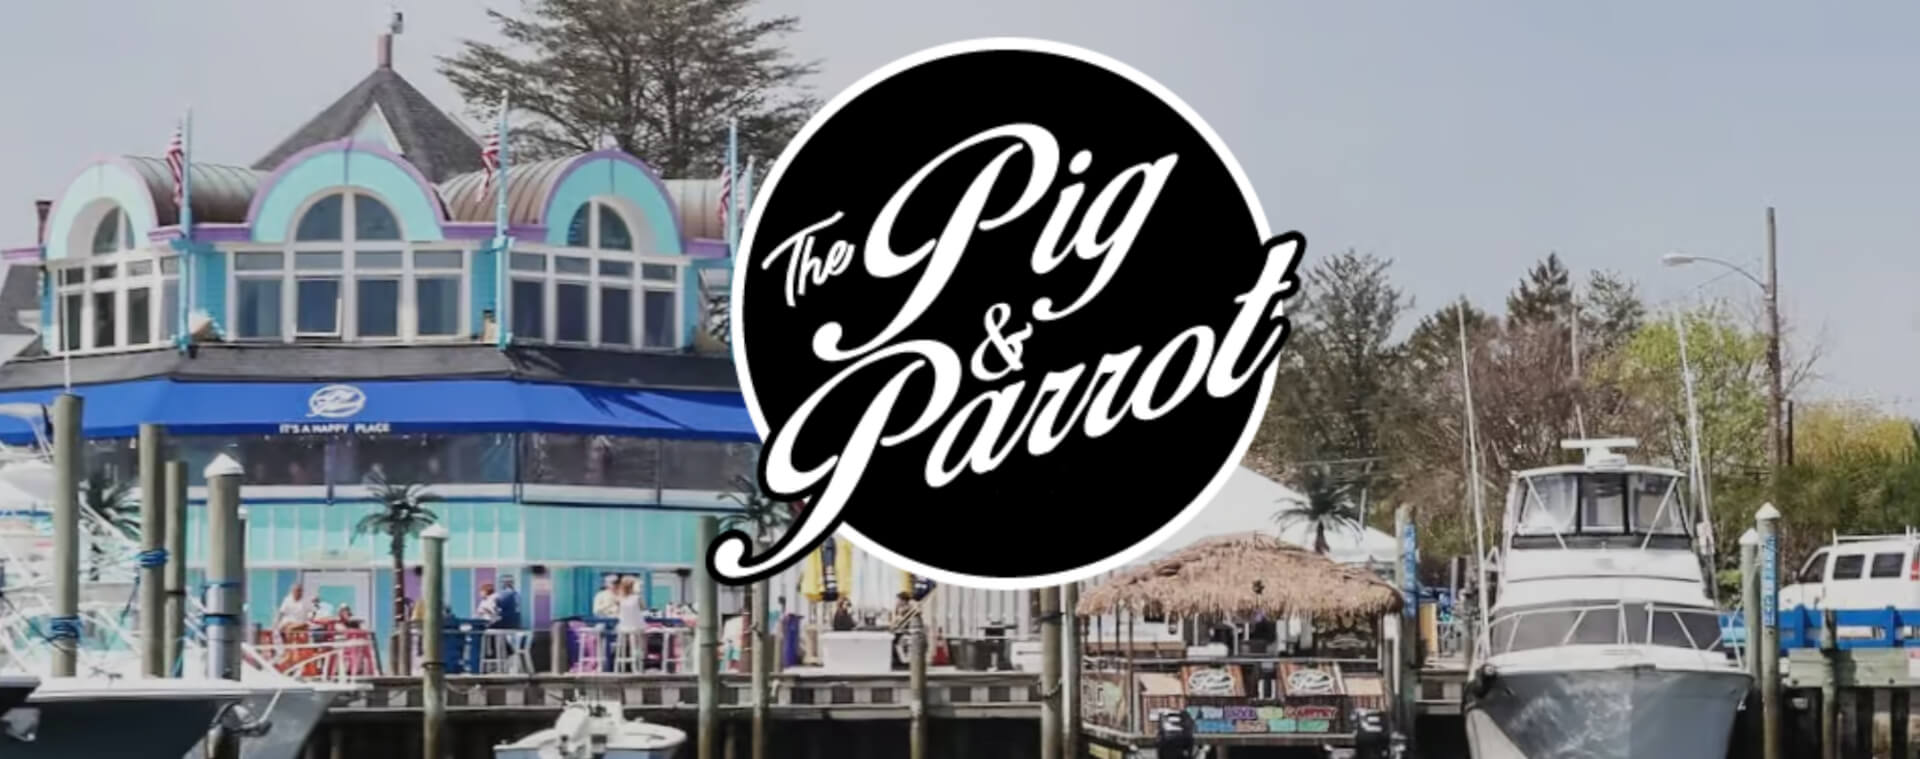 The Pig Parrot - 1on1 Internet Marketing